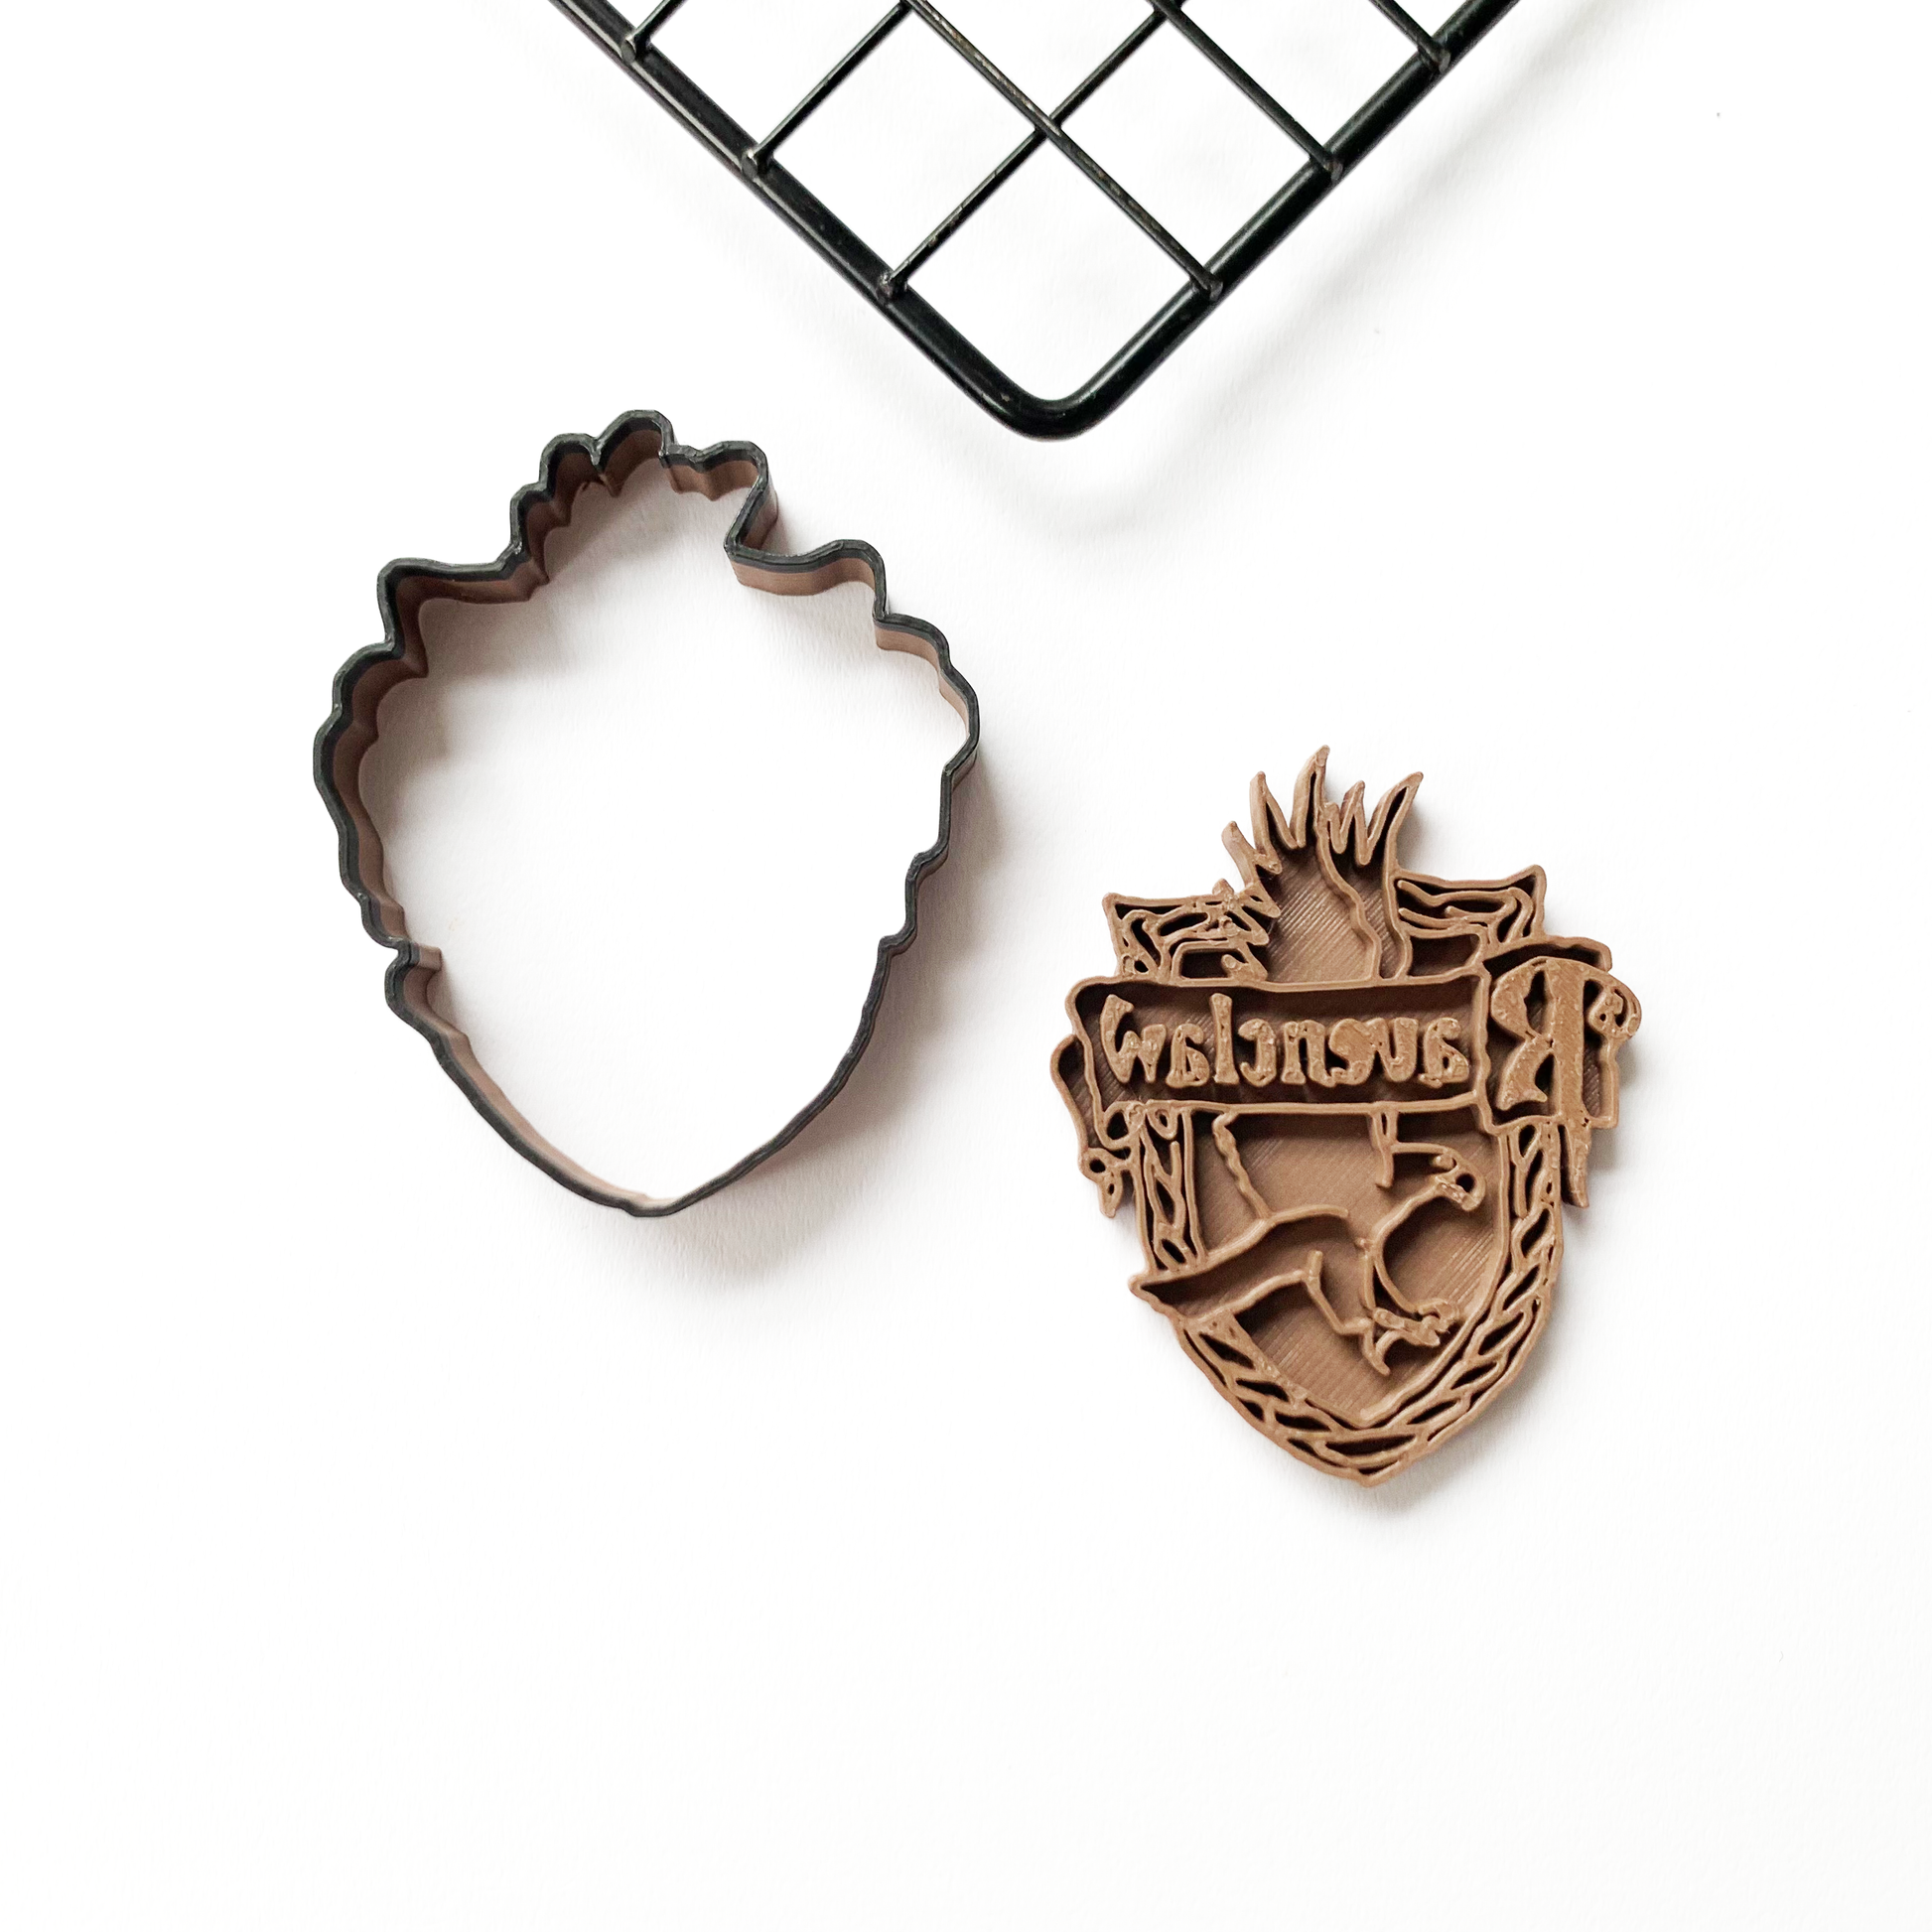 Ravenclaw badge Harry Potter-inspired Cookie Cutter Fondant Cake Decorating Mold MEG cookie cutters